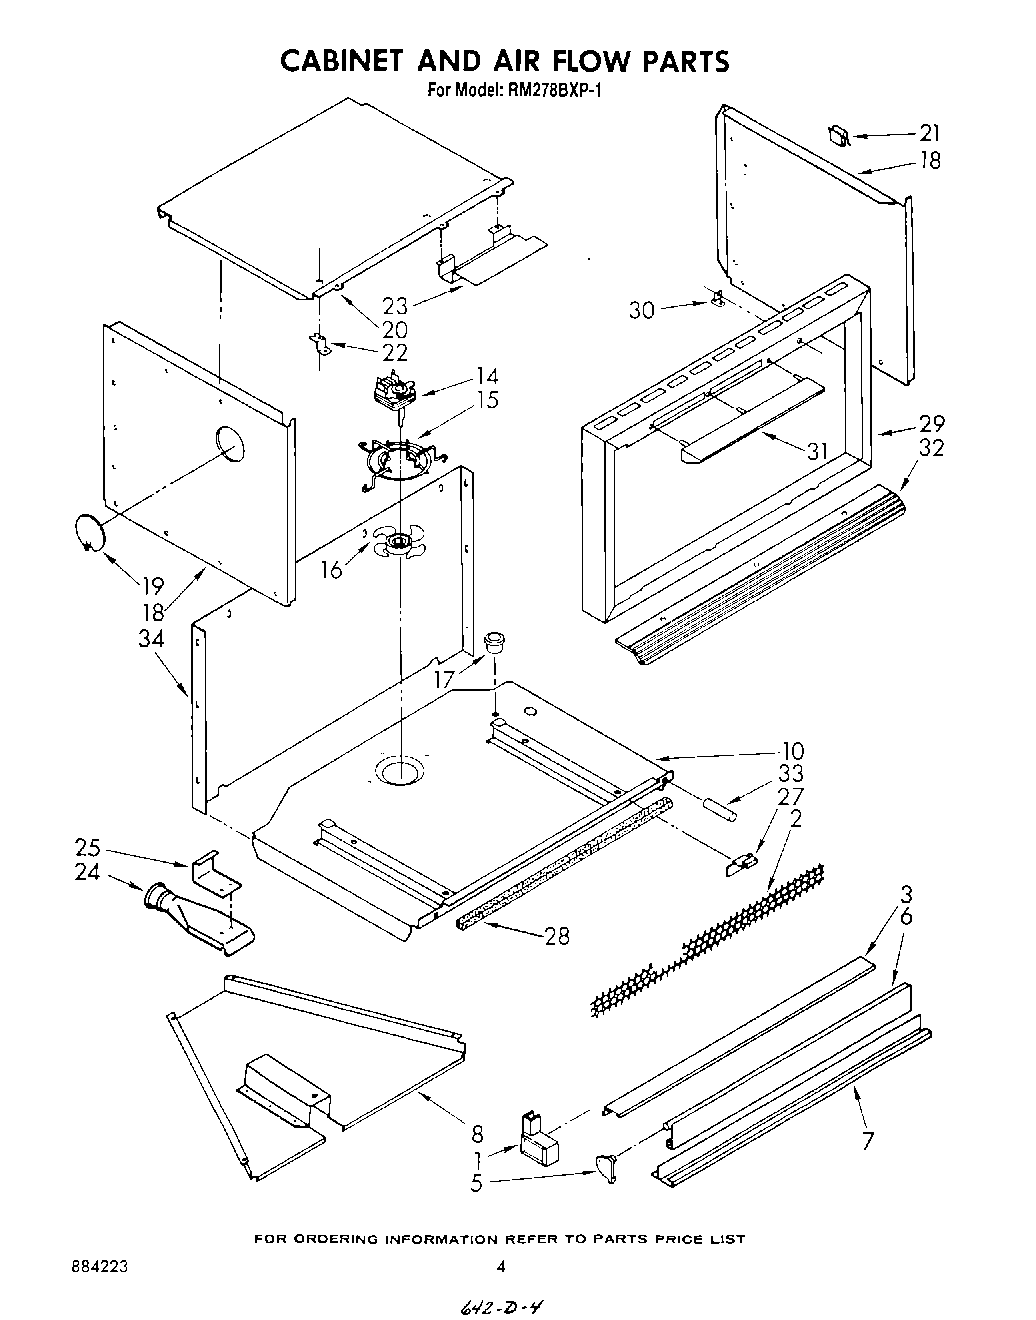 03 - CABINET AND AIR FLOW